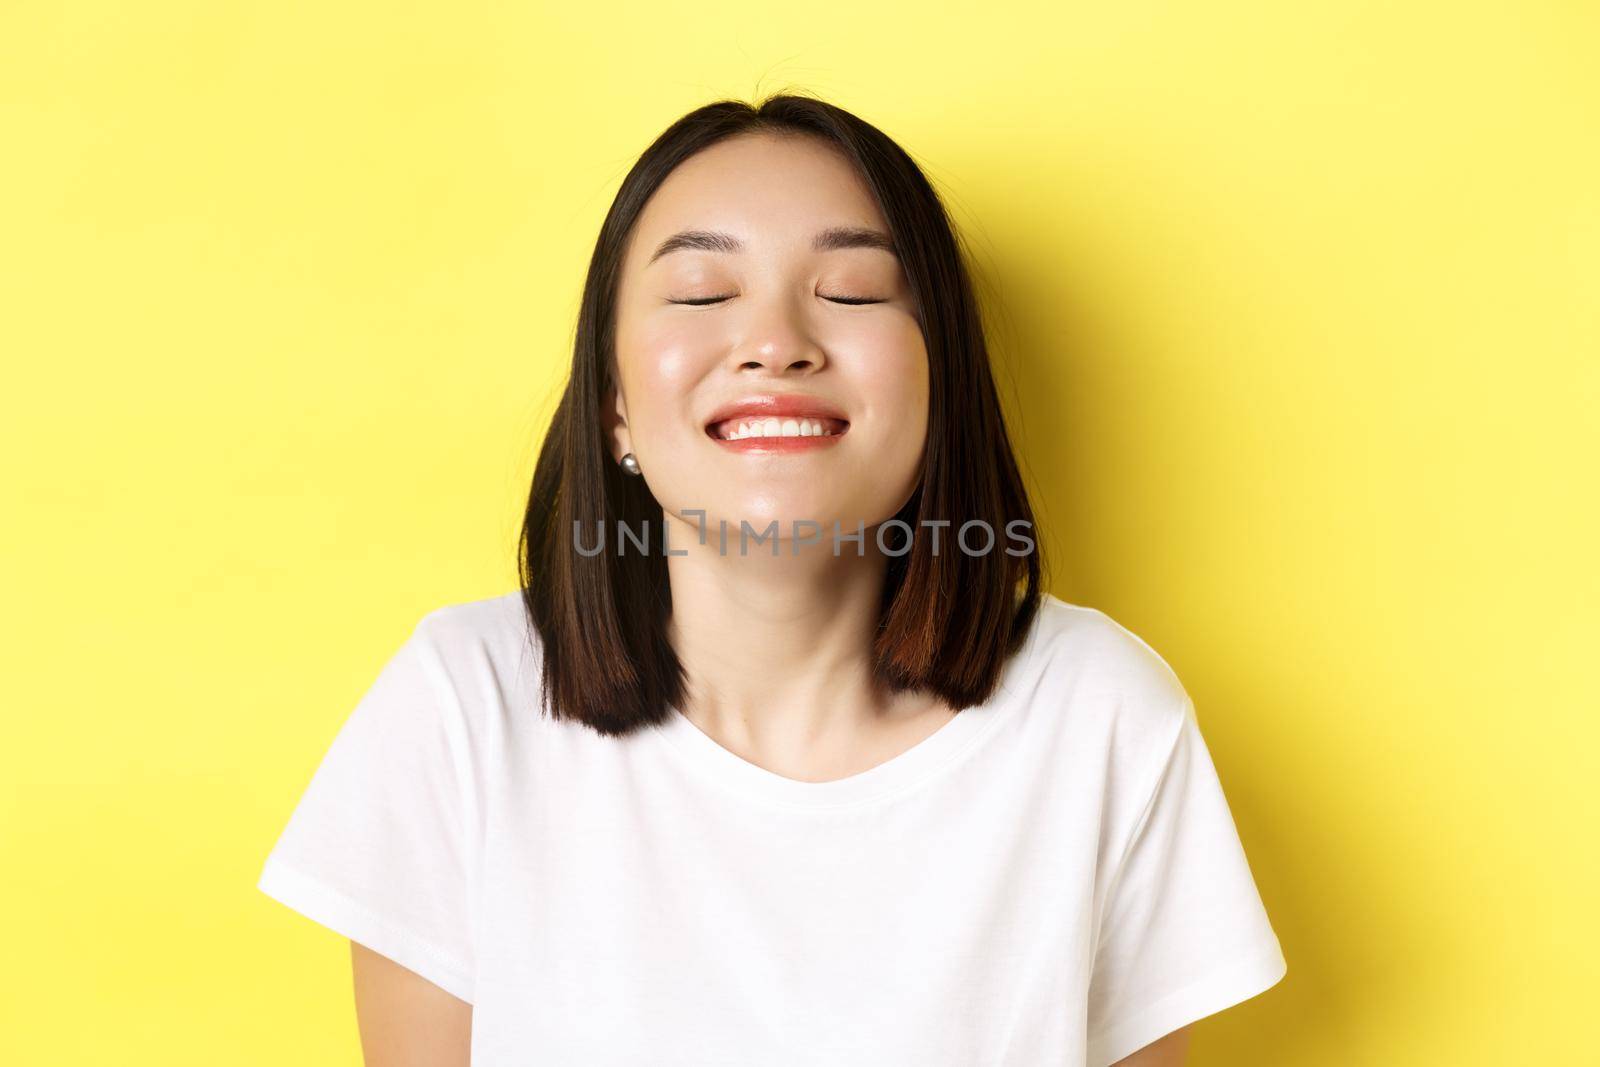 Close up of happy and relaxed asian woman enjoying sun, smiling with eyes closed and looking joyful, standing over yellow background.